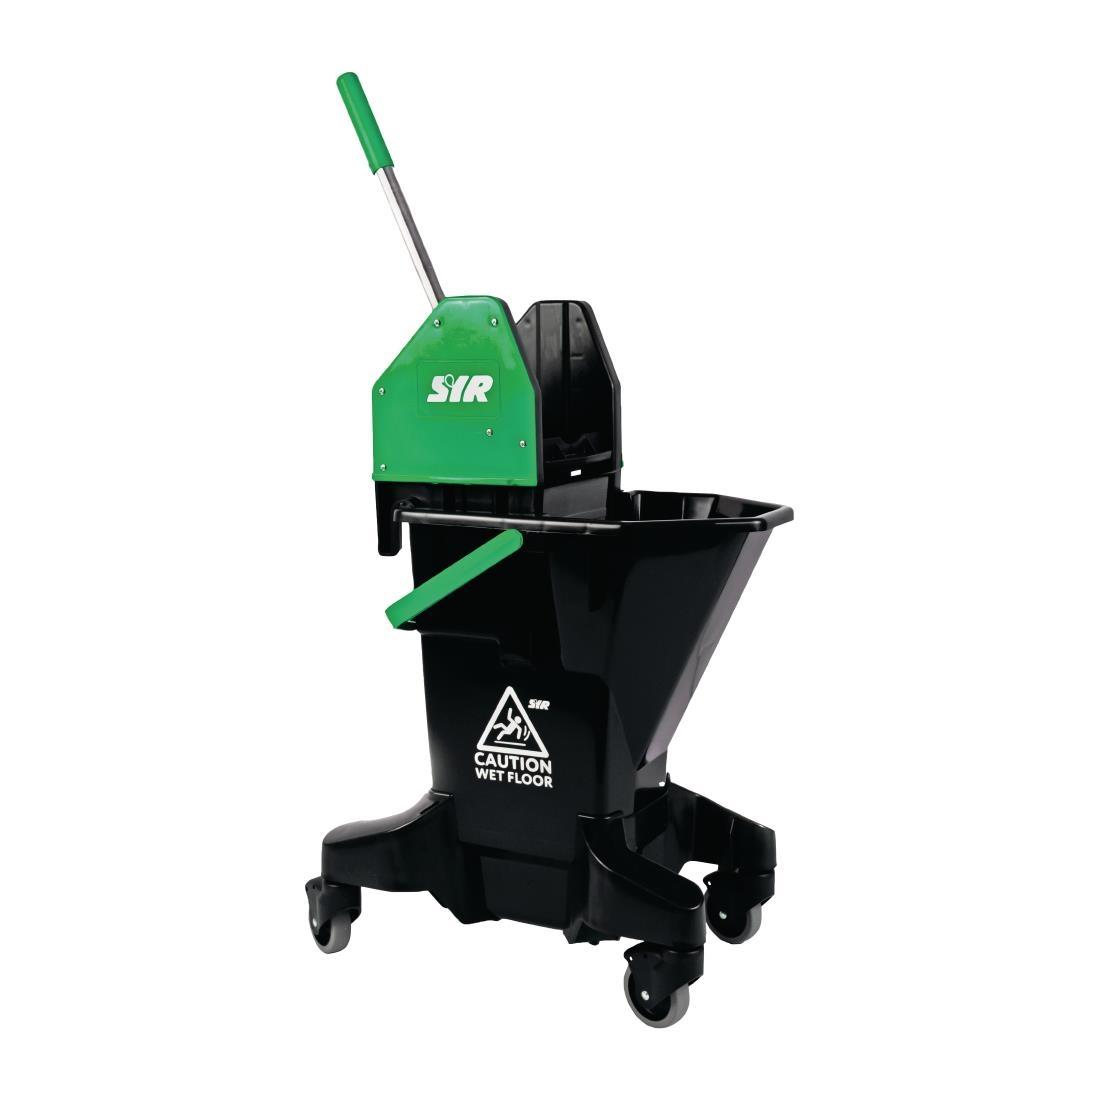 SYR Long Tall Sally Recycled Plastic Mop Bucket and Wringer 16Ltr Green - FT396  - 1